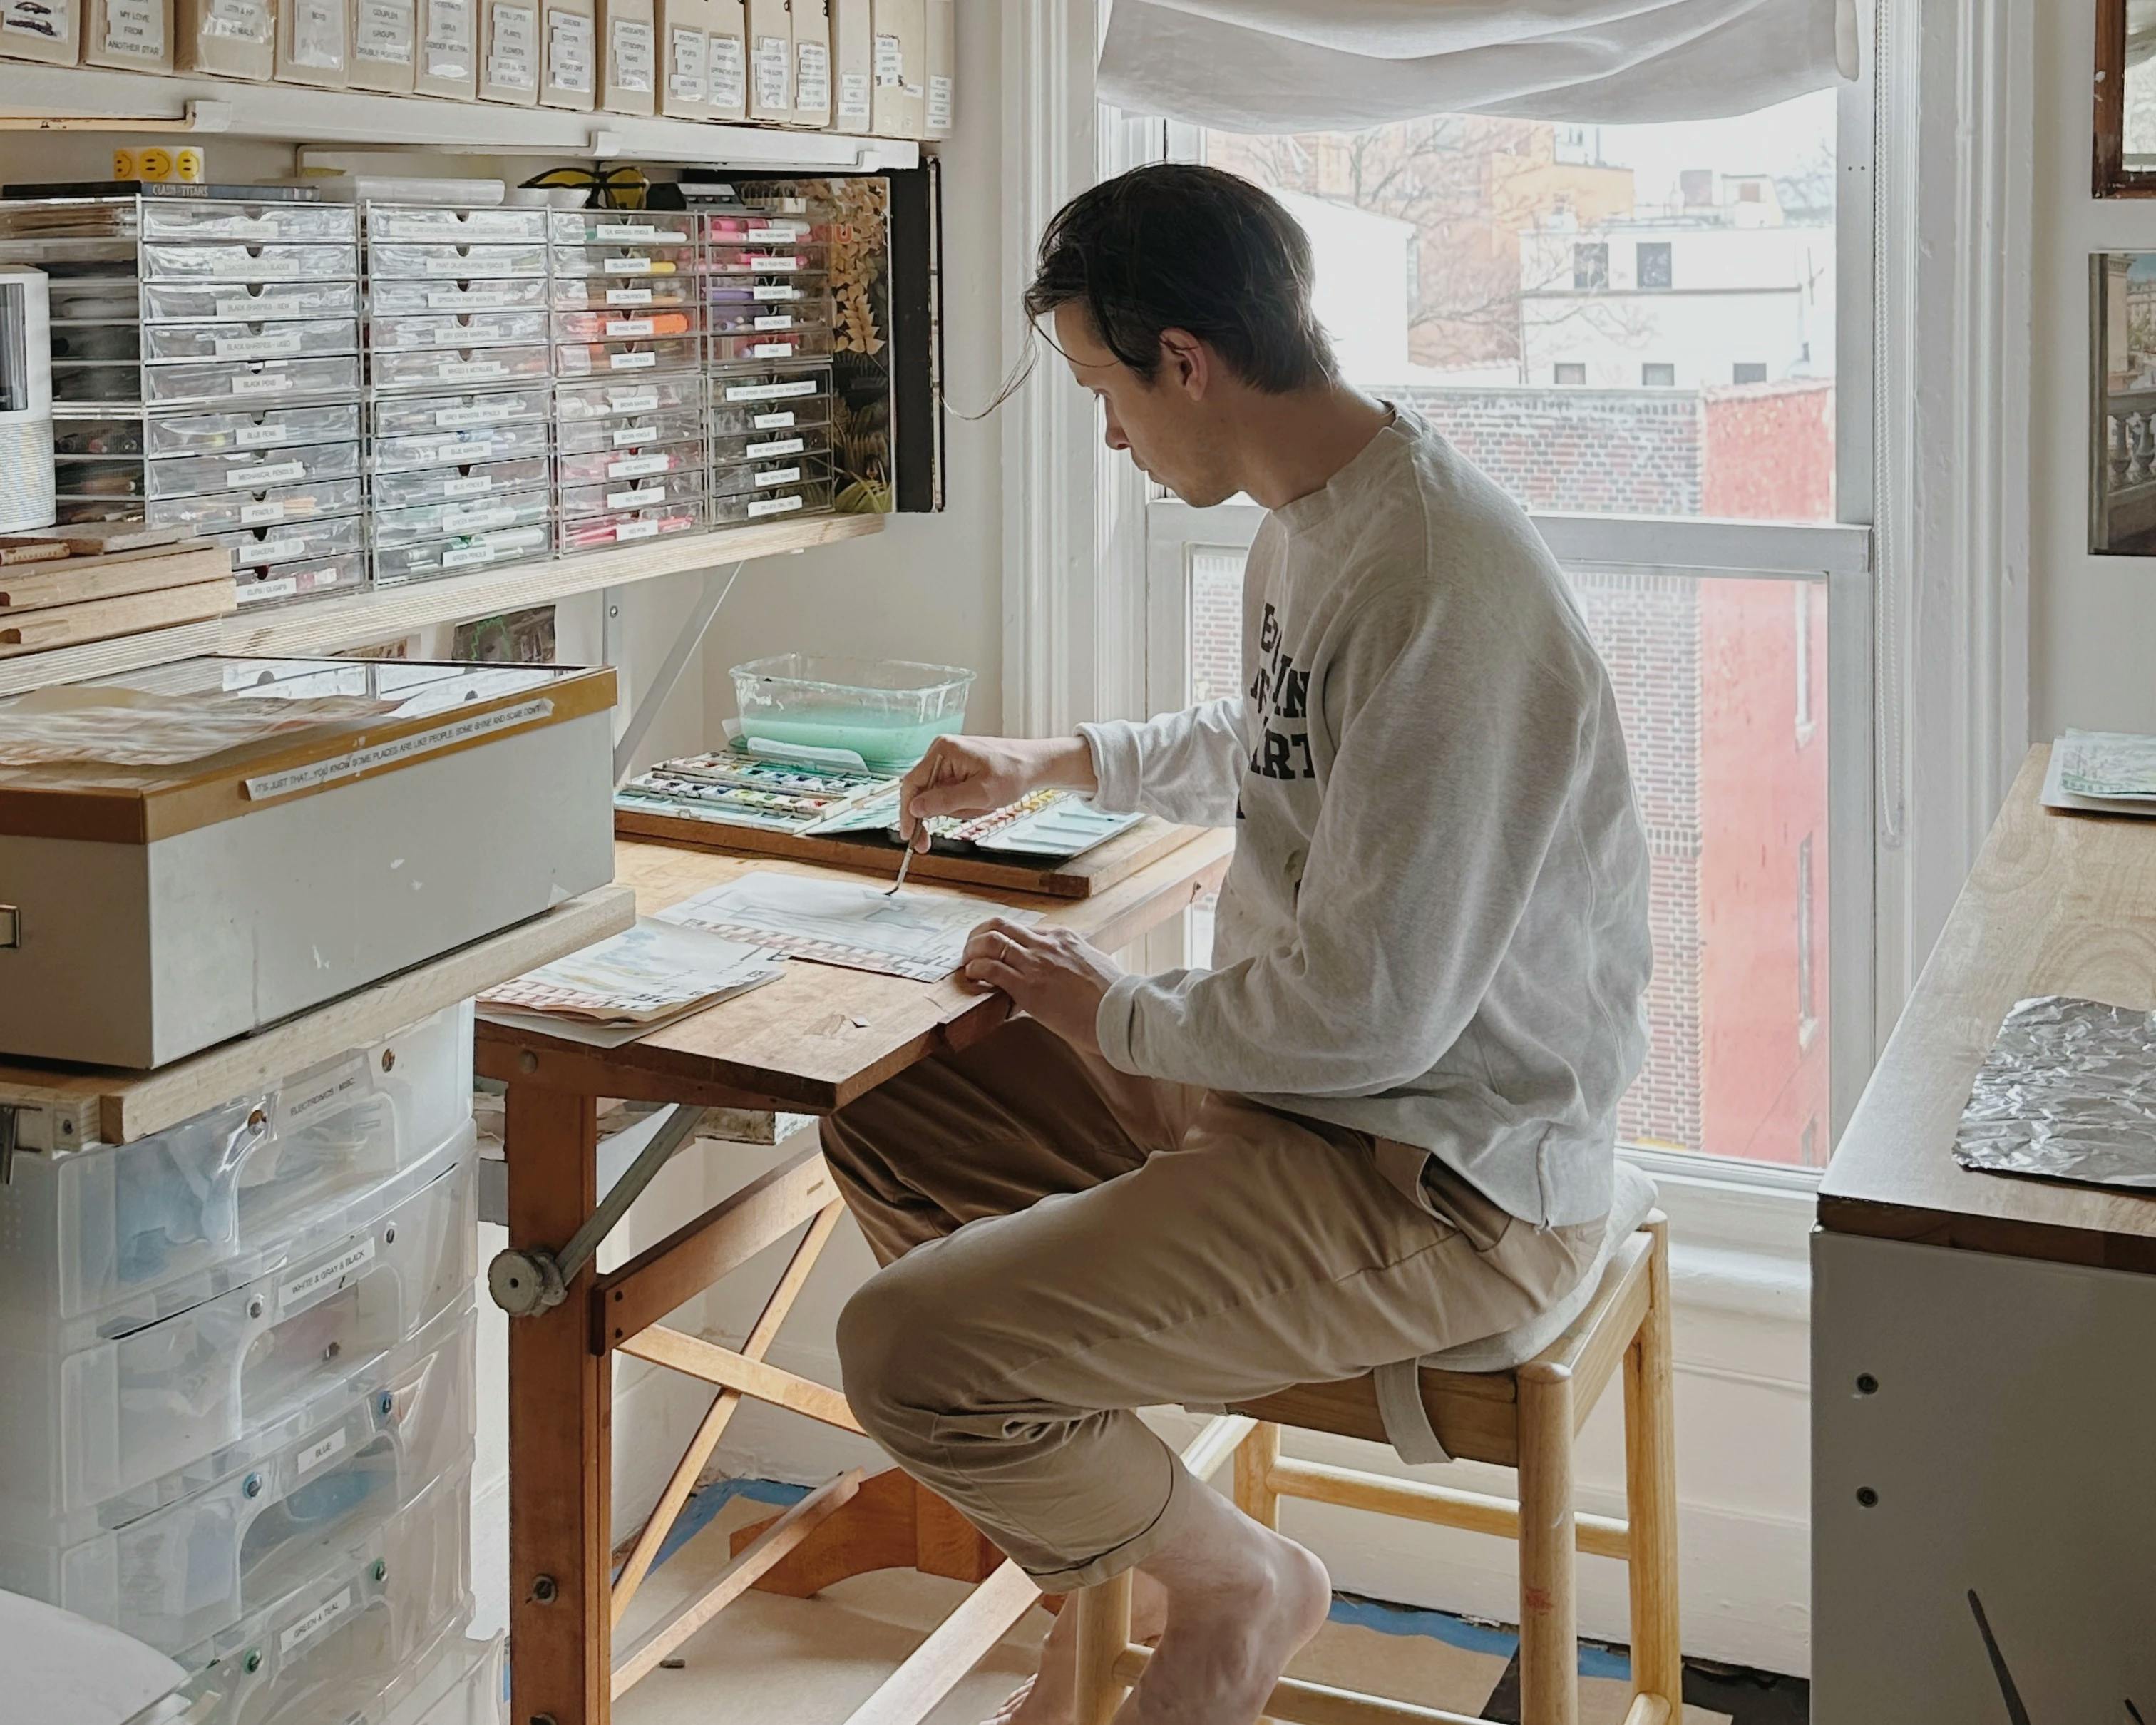 Artist David Rhoads working on a watercolor painting in his small, but organized Brooklyn studio.